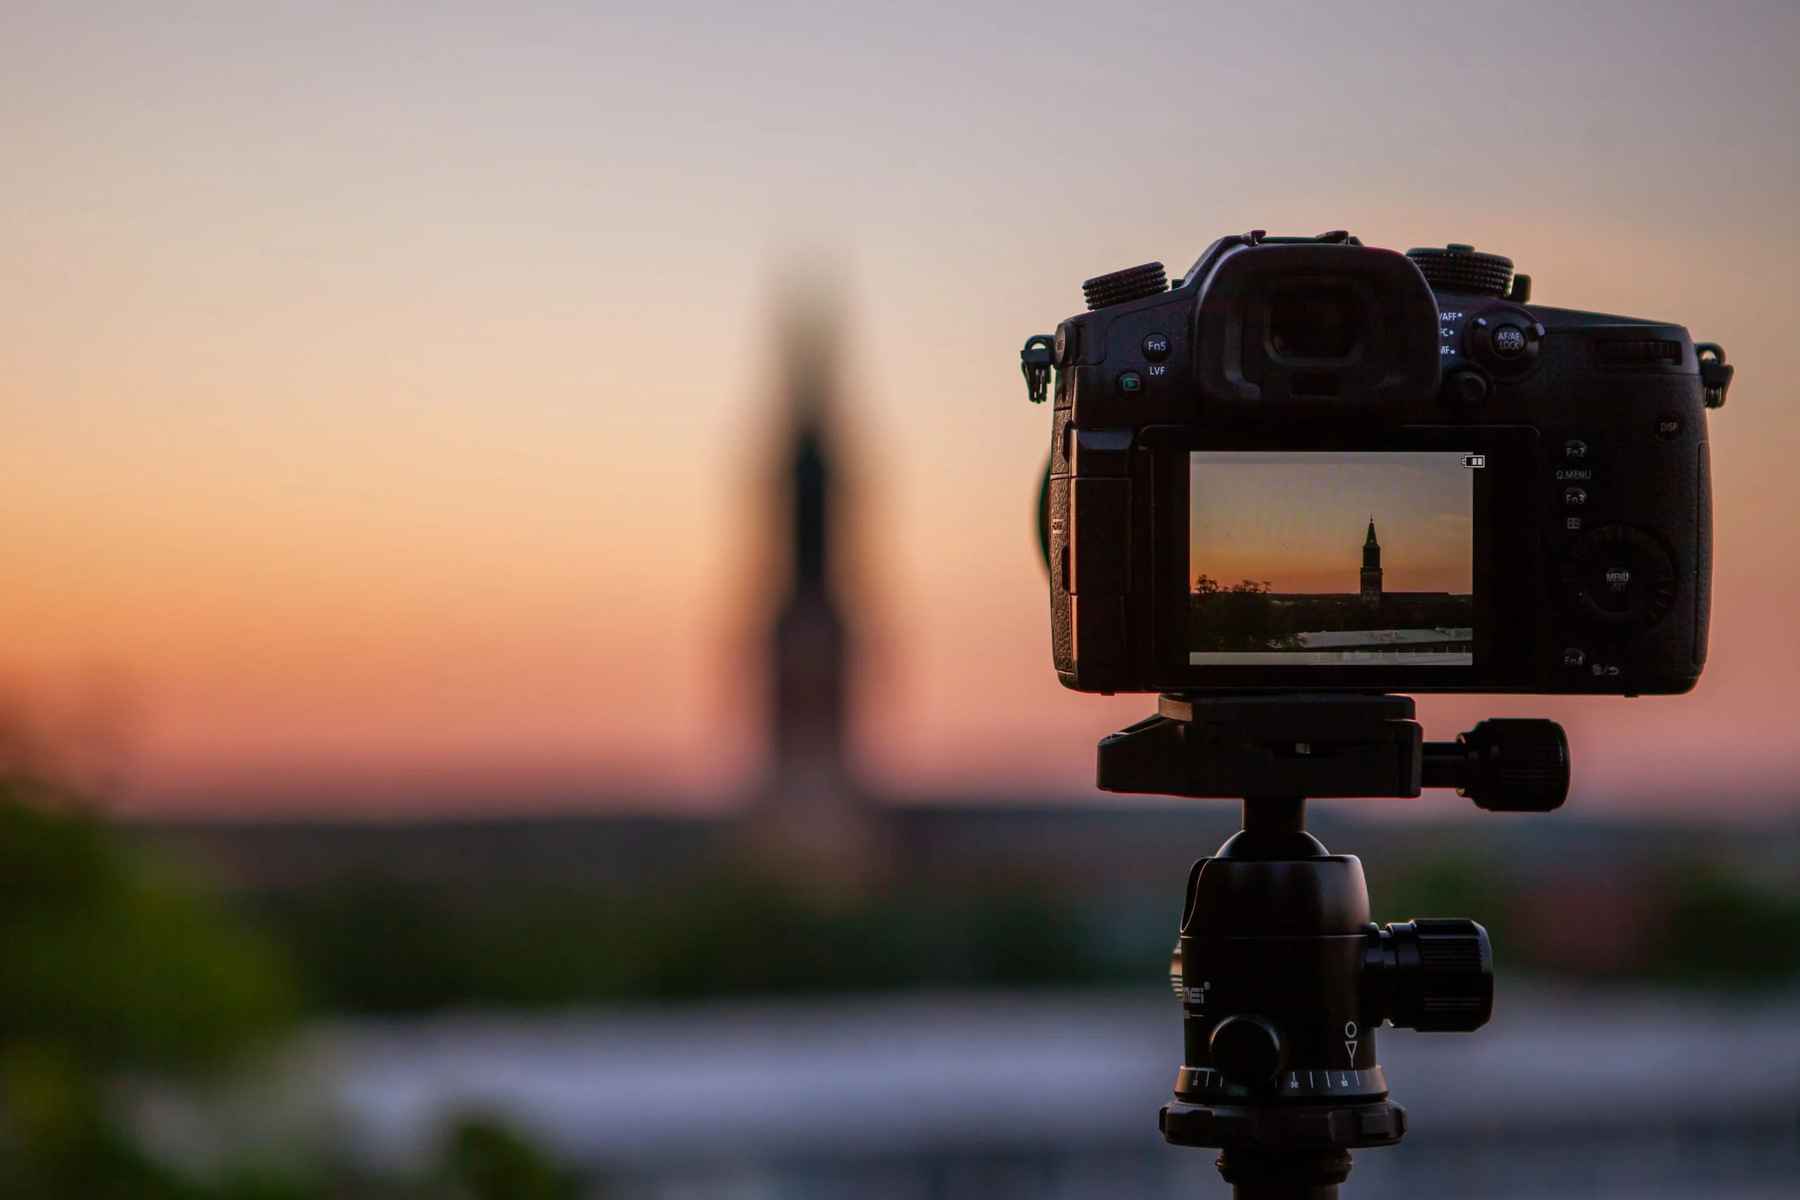 How To Zoom With A Mirrorless Camera